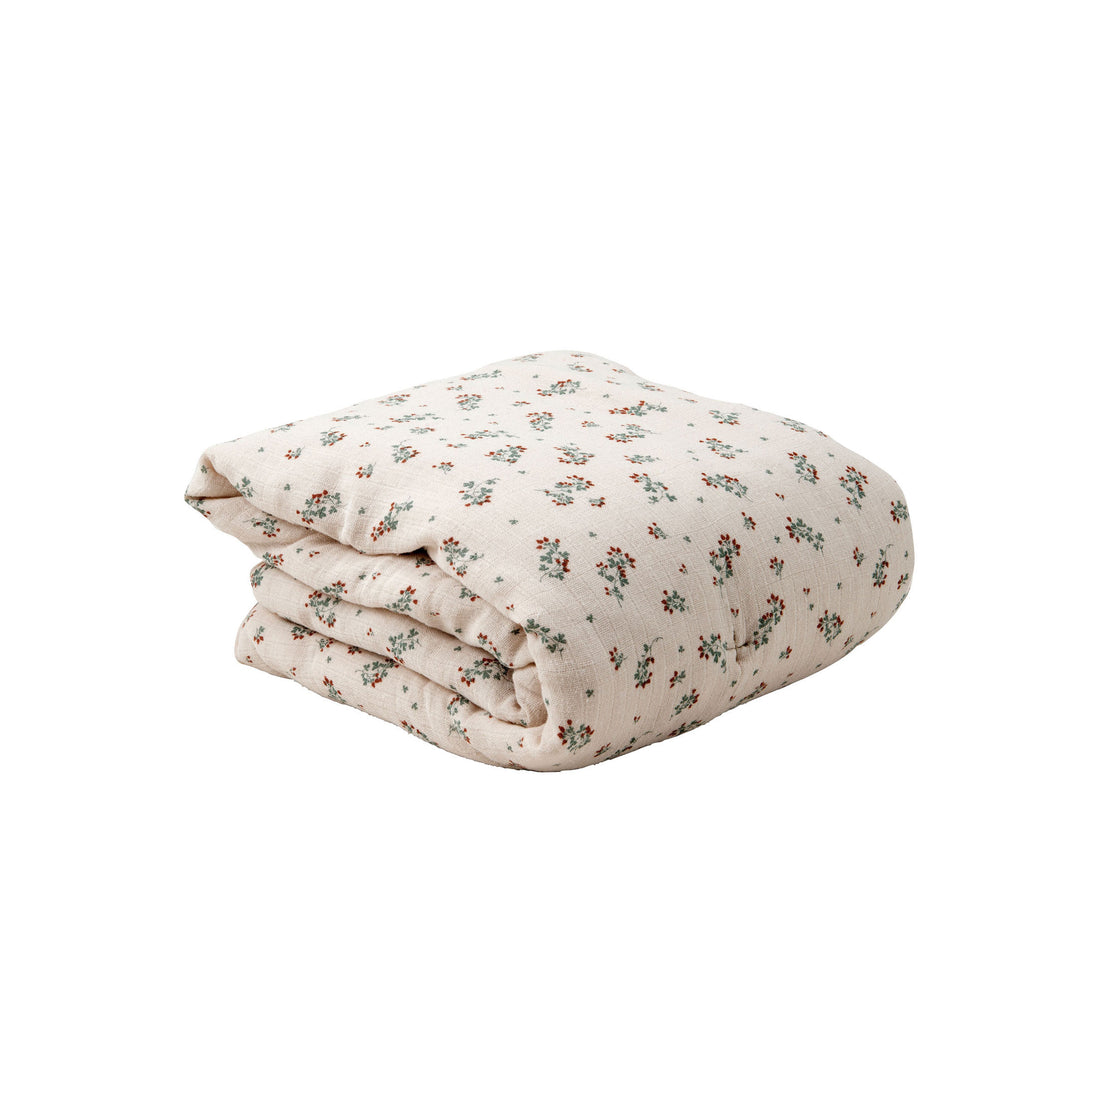 Garbo and Friends Clover Muslin Swaddle Blanket